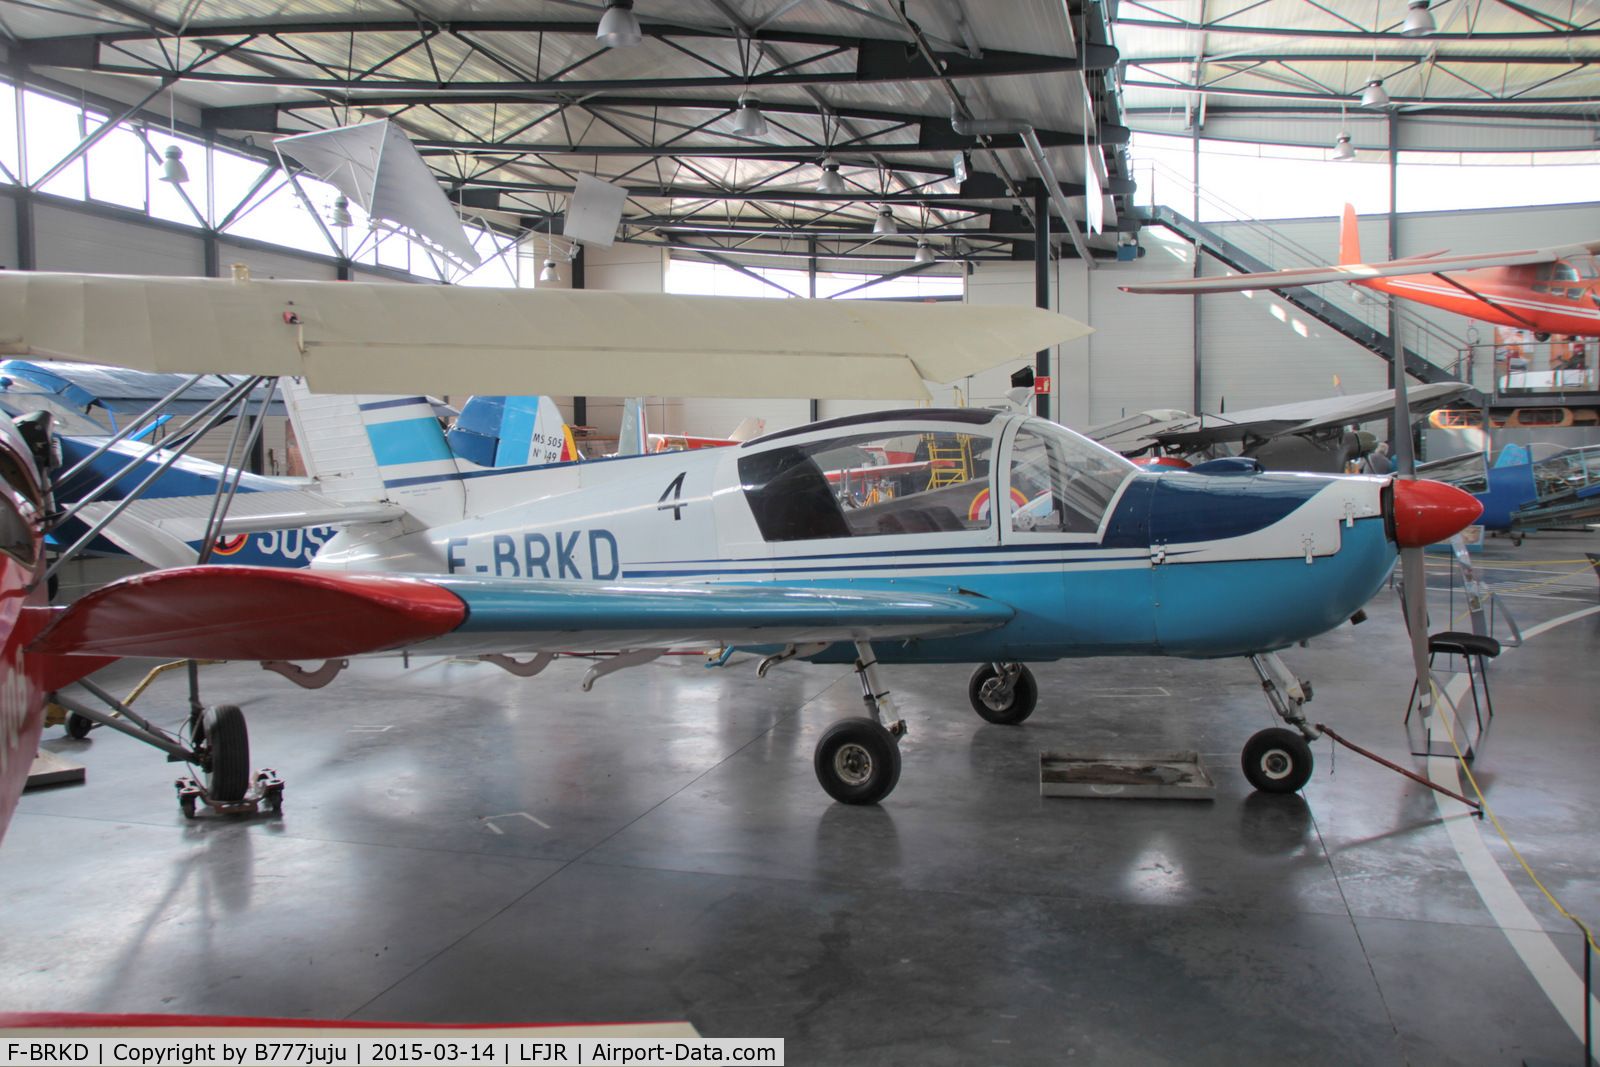 F-BRKD, Socata MS-893A Rallye Commodore 180 C/N 10958, at Angers